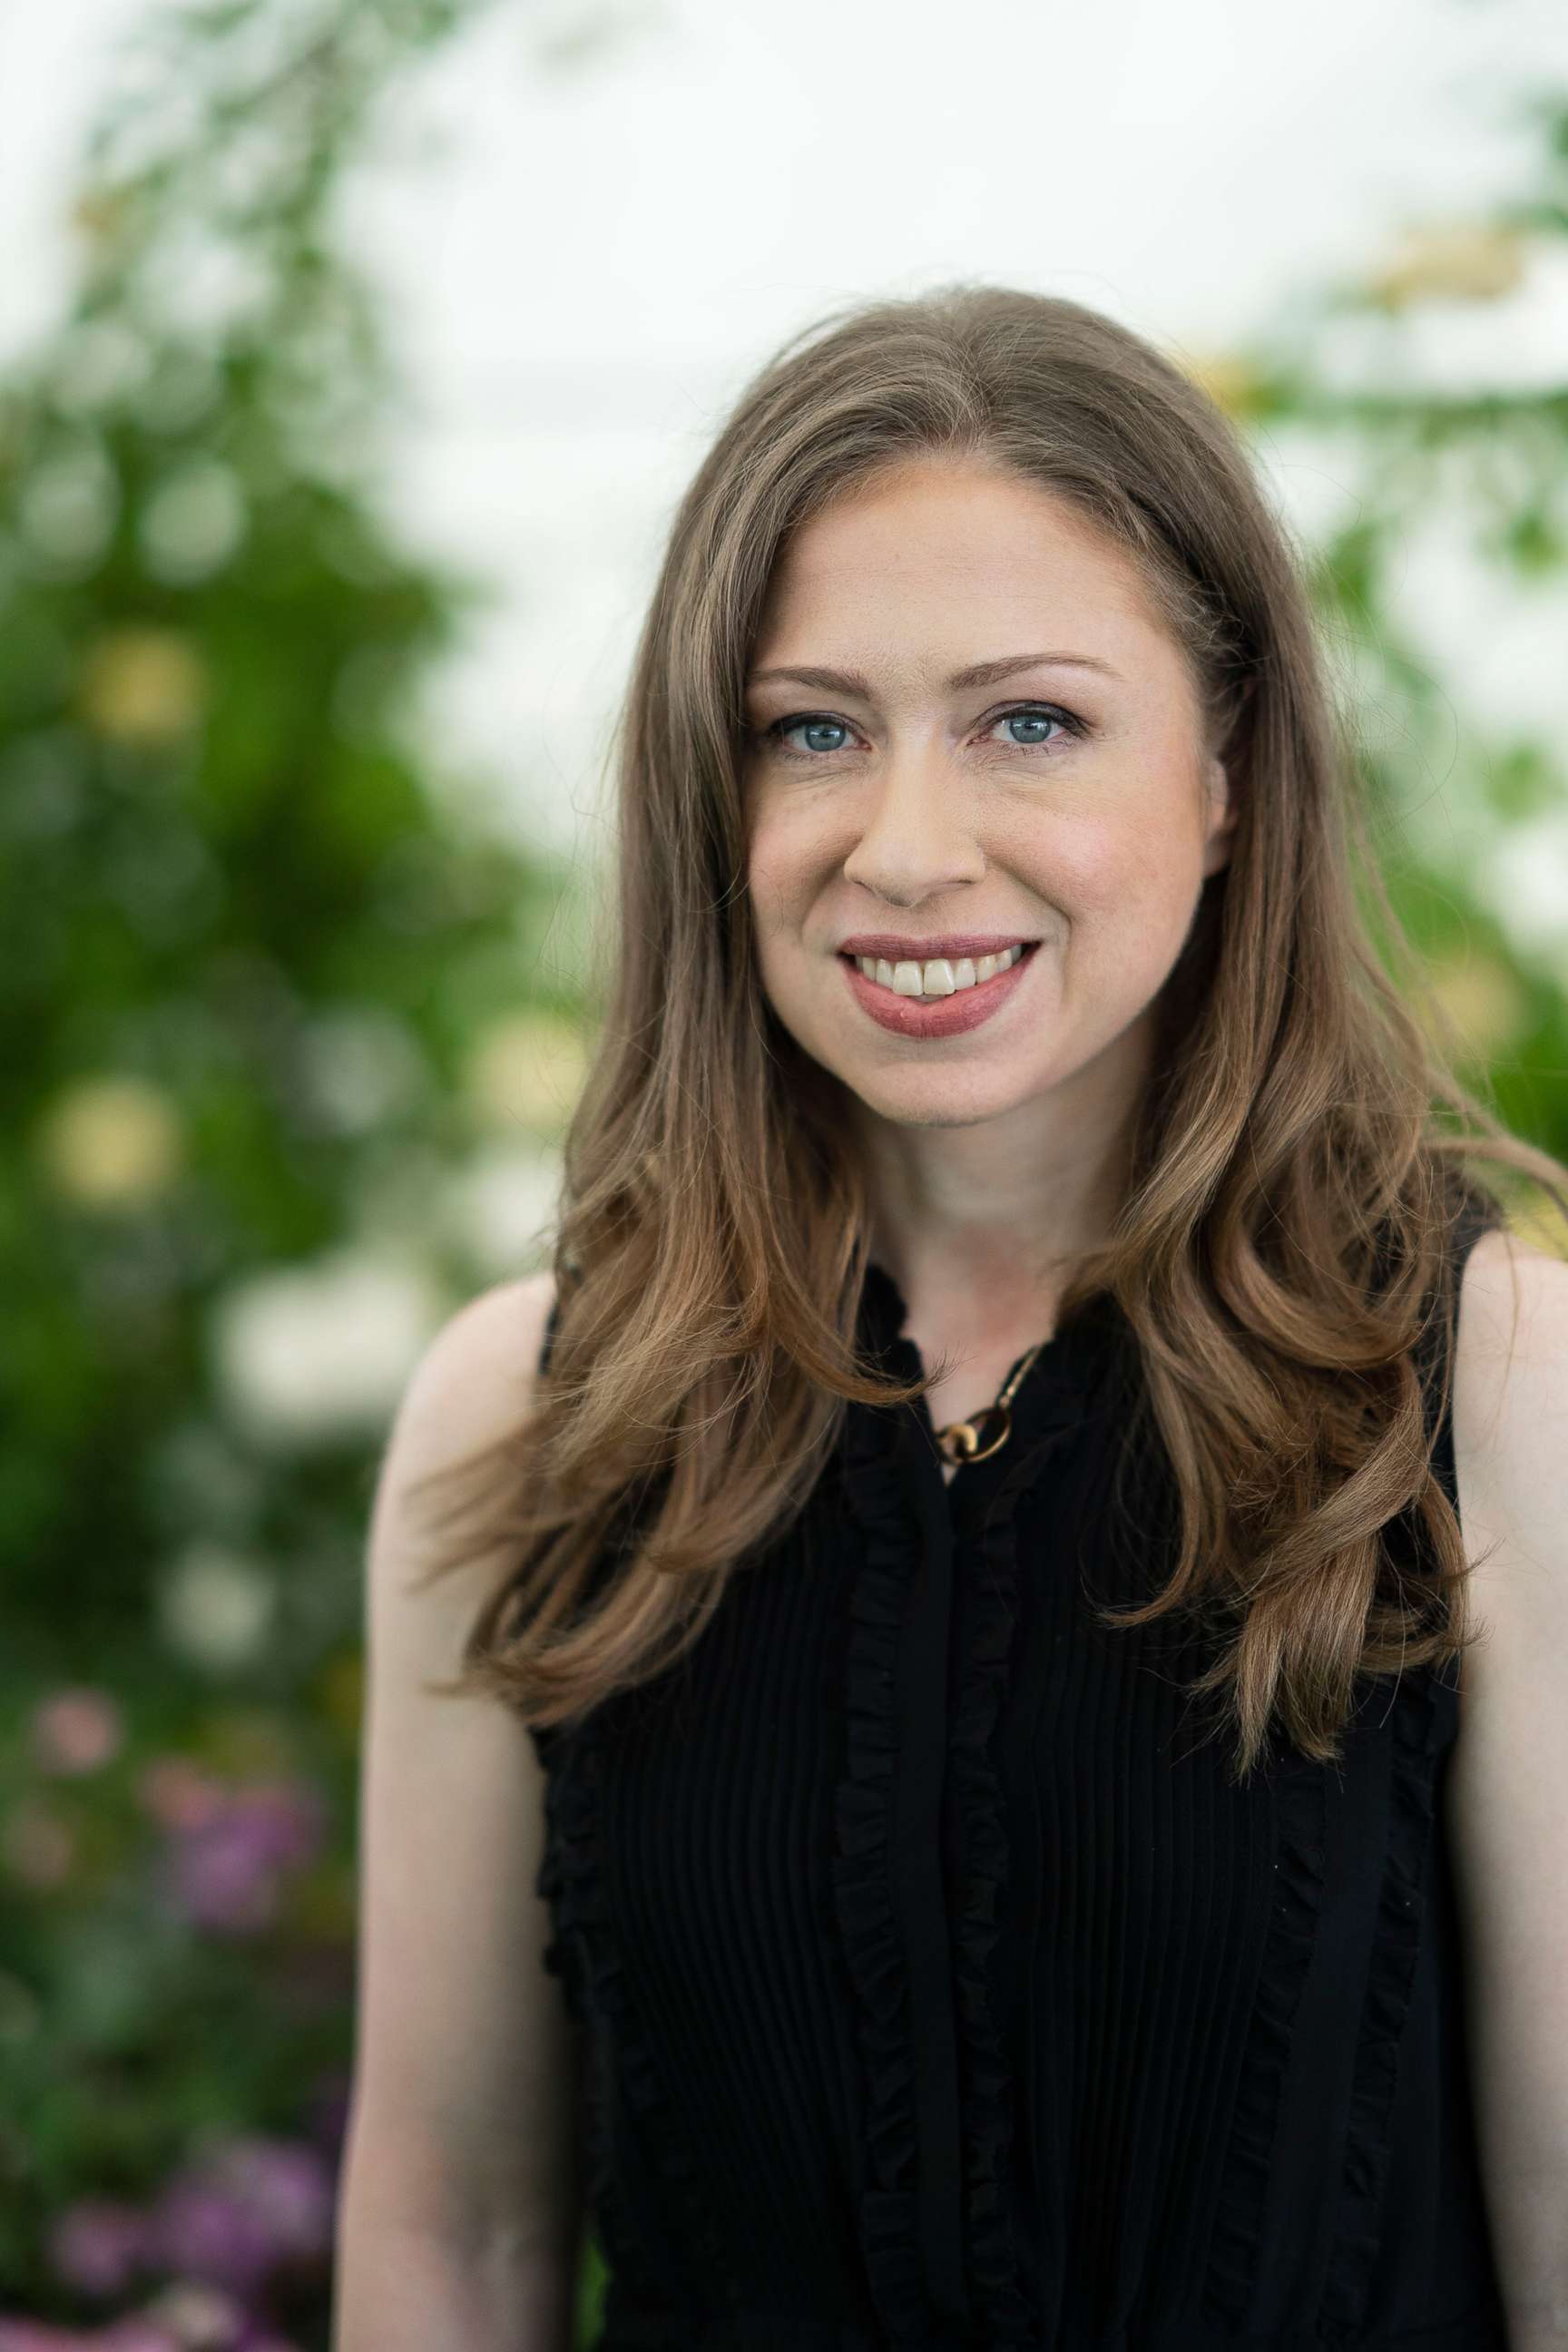 PHOTO: Chelsea Clinton, at the Hay Festival on June 2, 2018 in Hay-on-Wye, Wales.